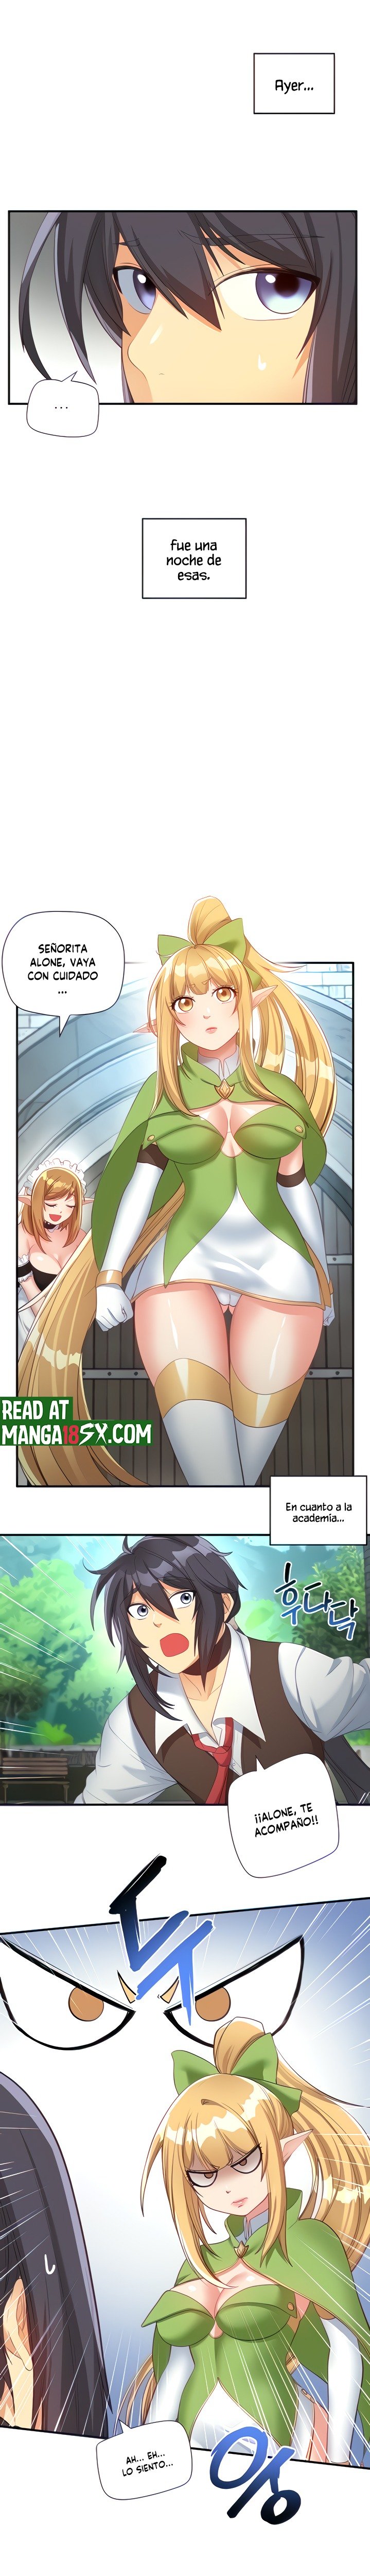 slave-knight-of-the-elf-raw-chap-37-4